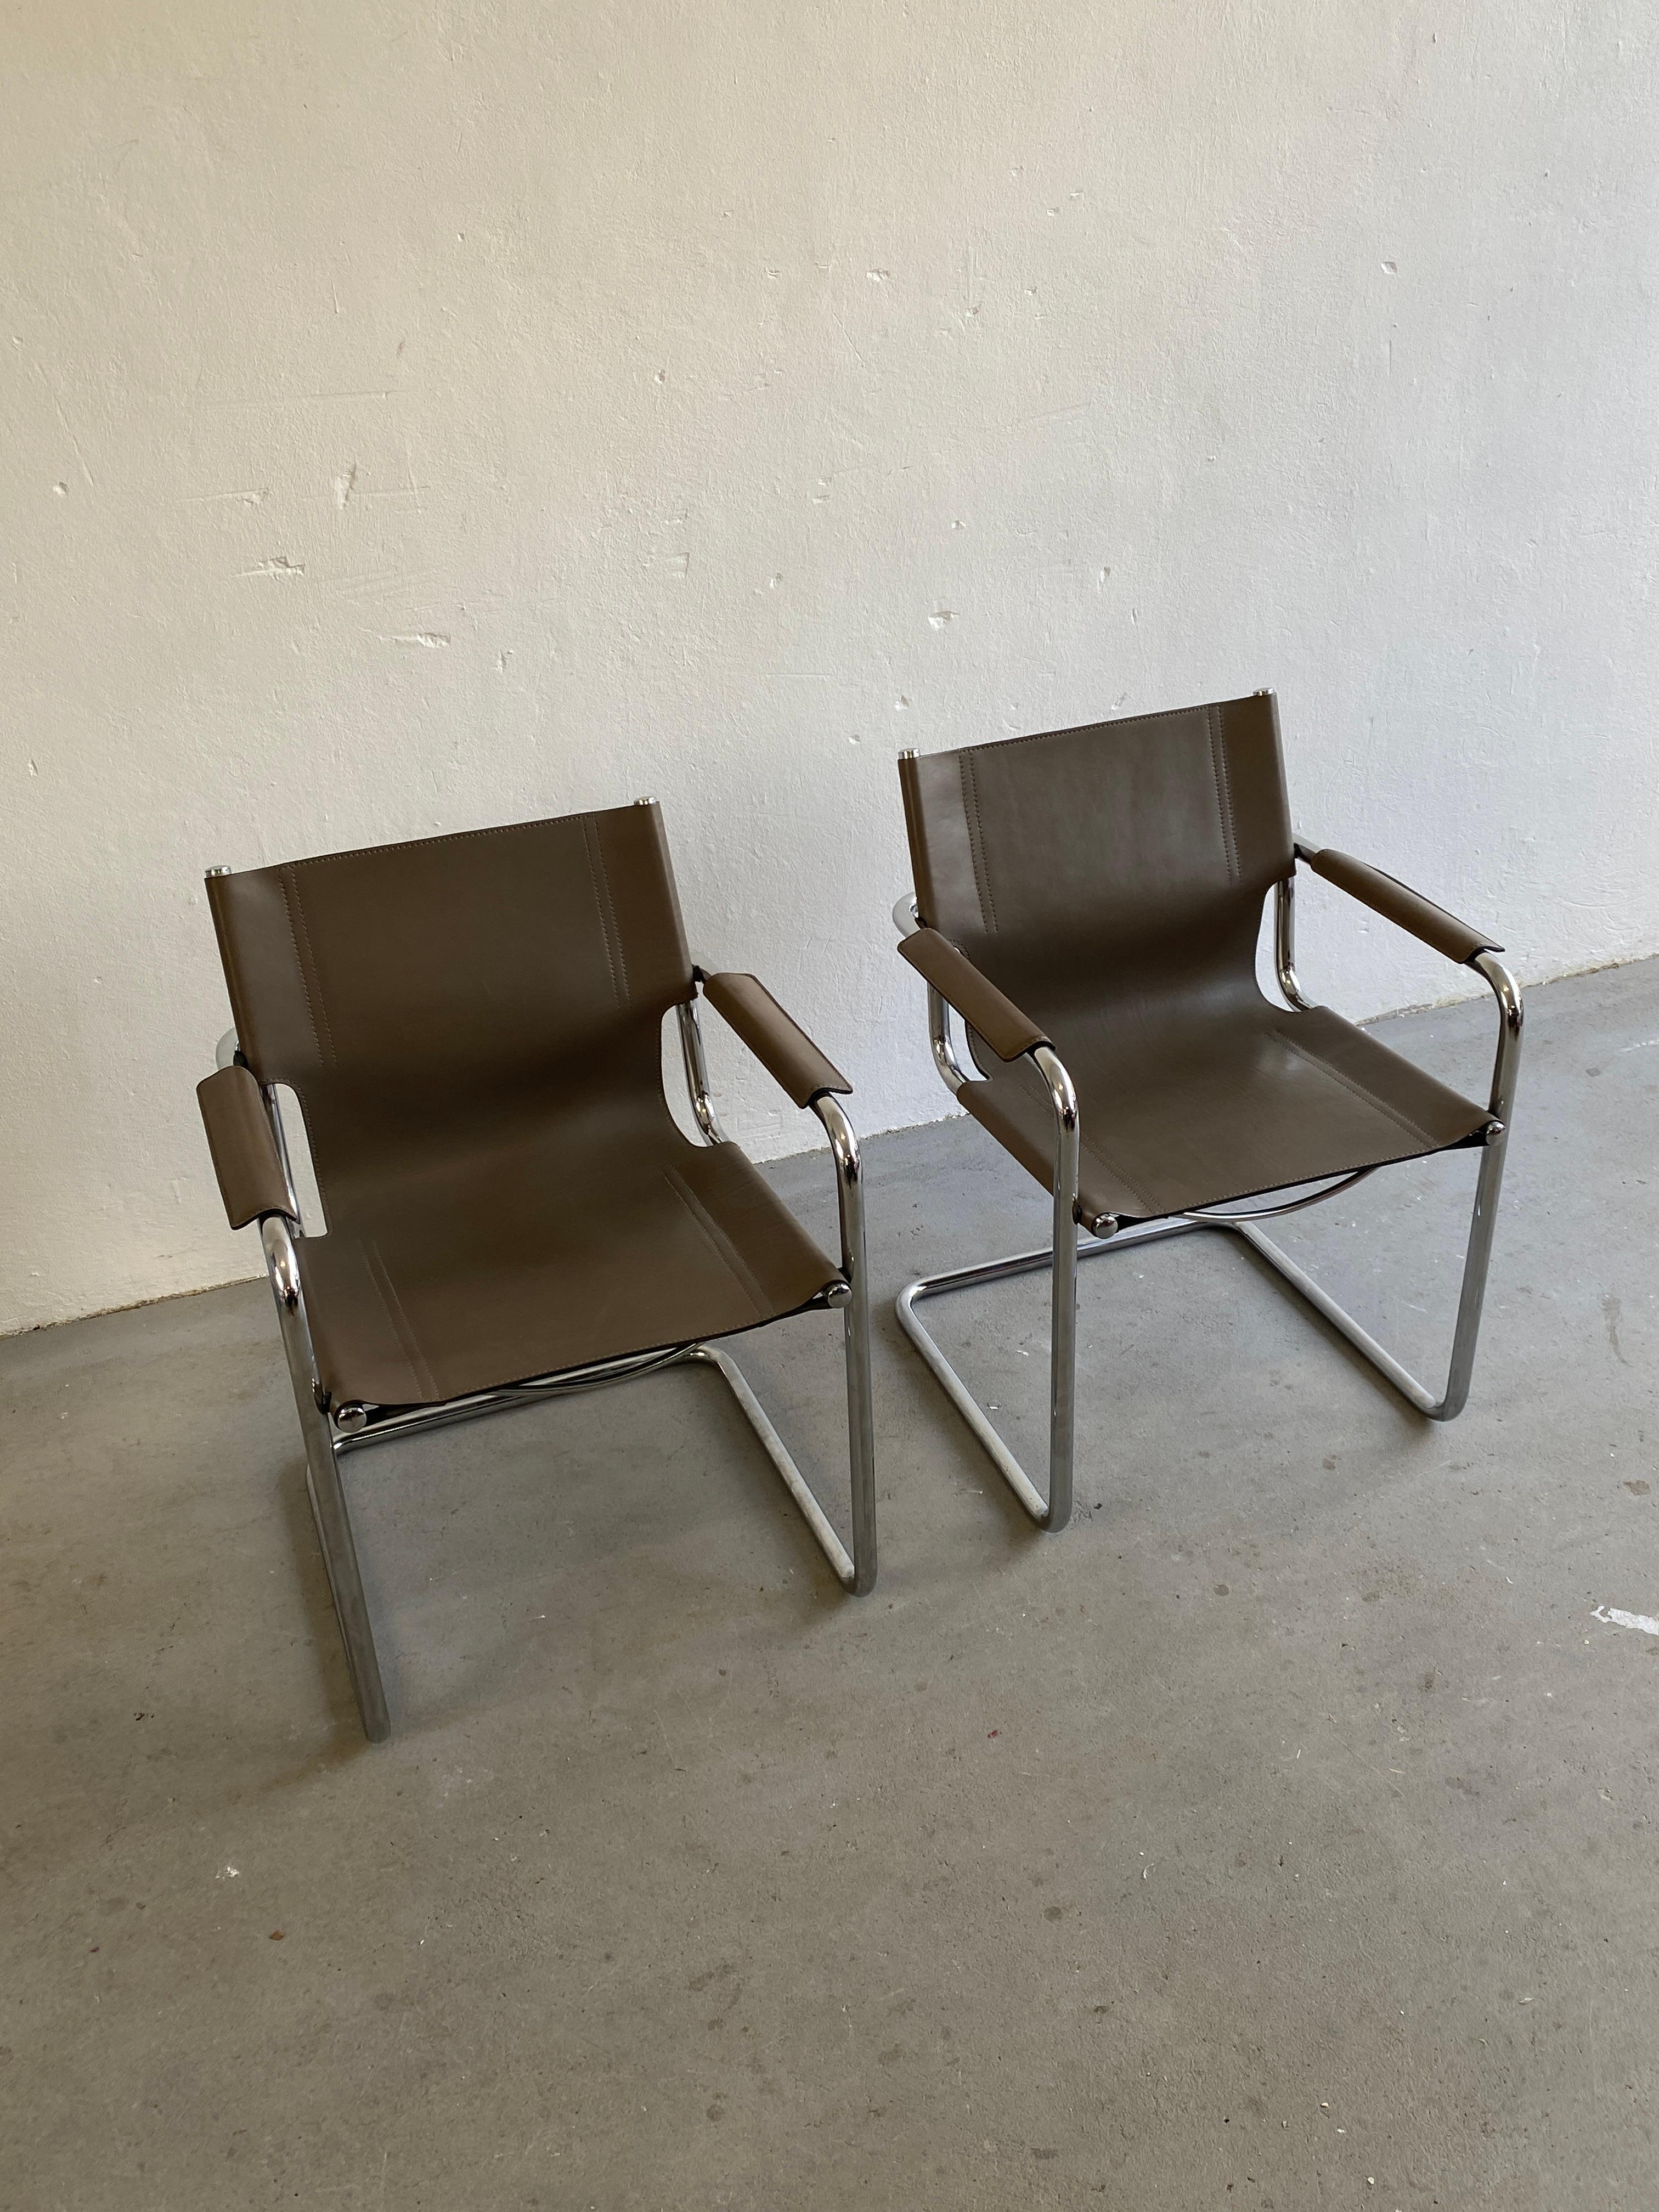 Italian Vintage Leather Cantilever Chairs, Centro Studi for Matteo Grassi, 1980s Italy